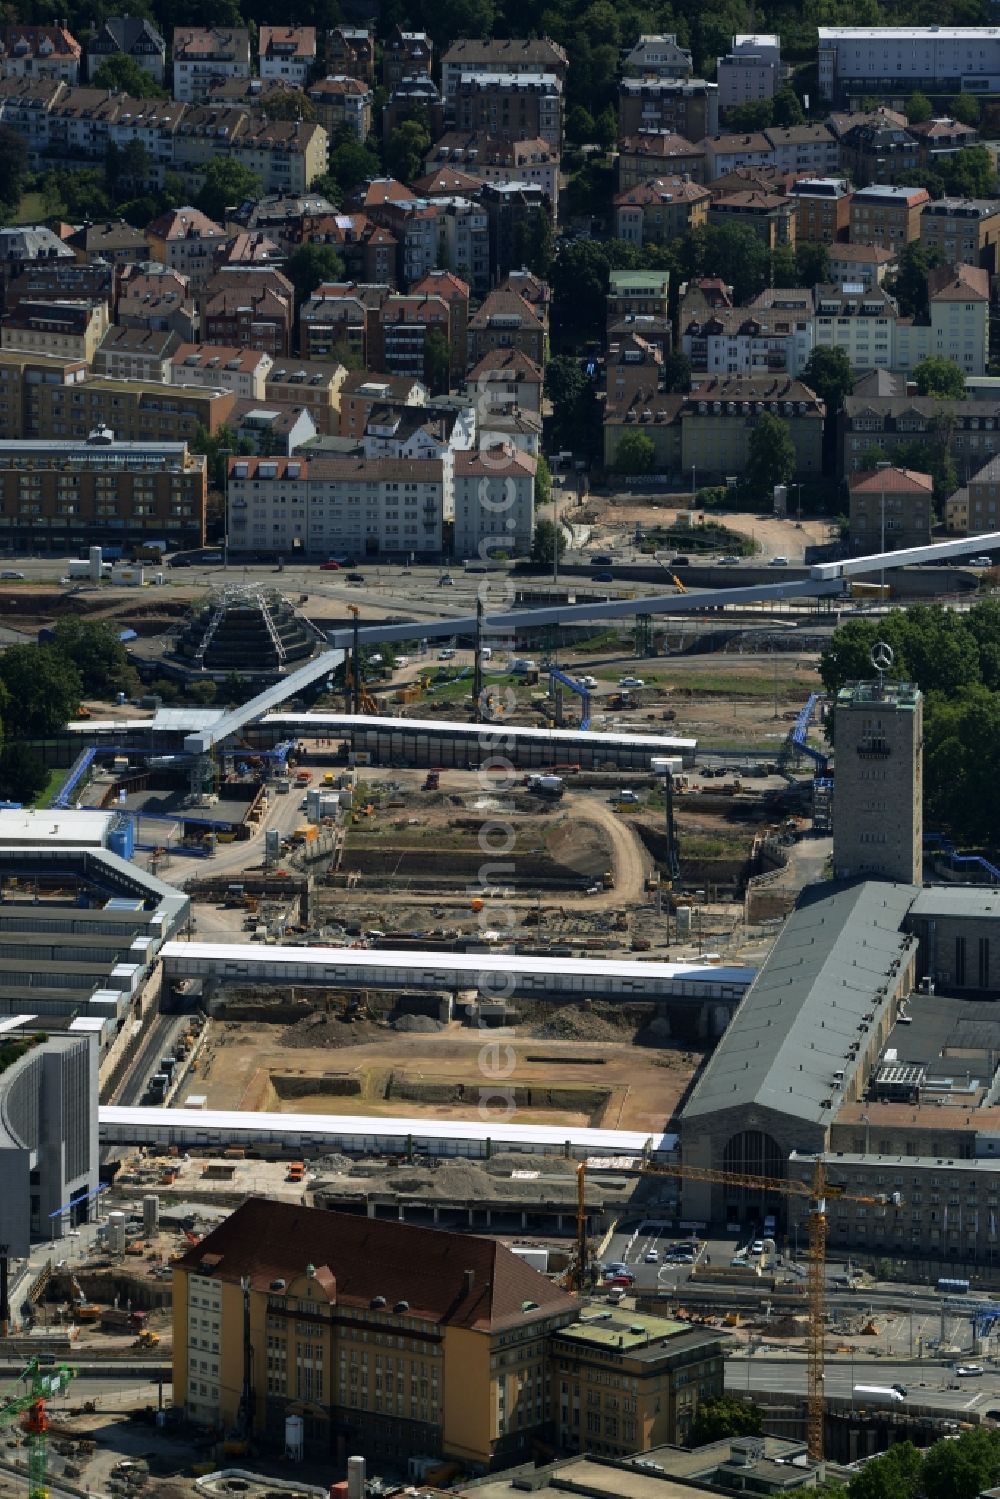 Stuttgart from above - Construction site at the Stuttgart Central station in Baden-Wuerttemberg. The termnal station will be largely demolished during the project Stuttgart 21 and converted into an underground transit station